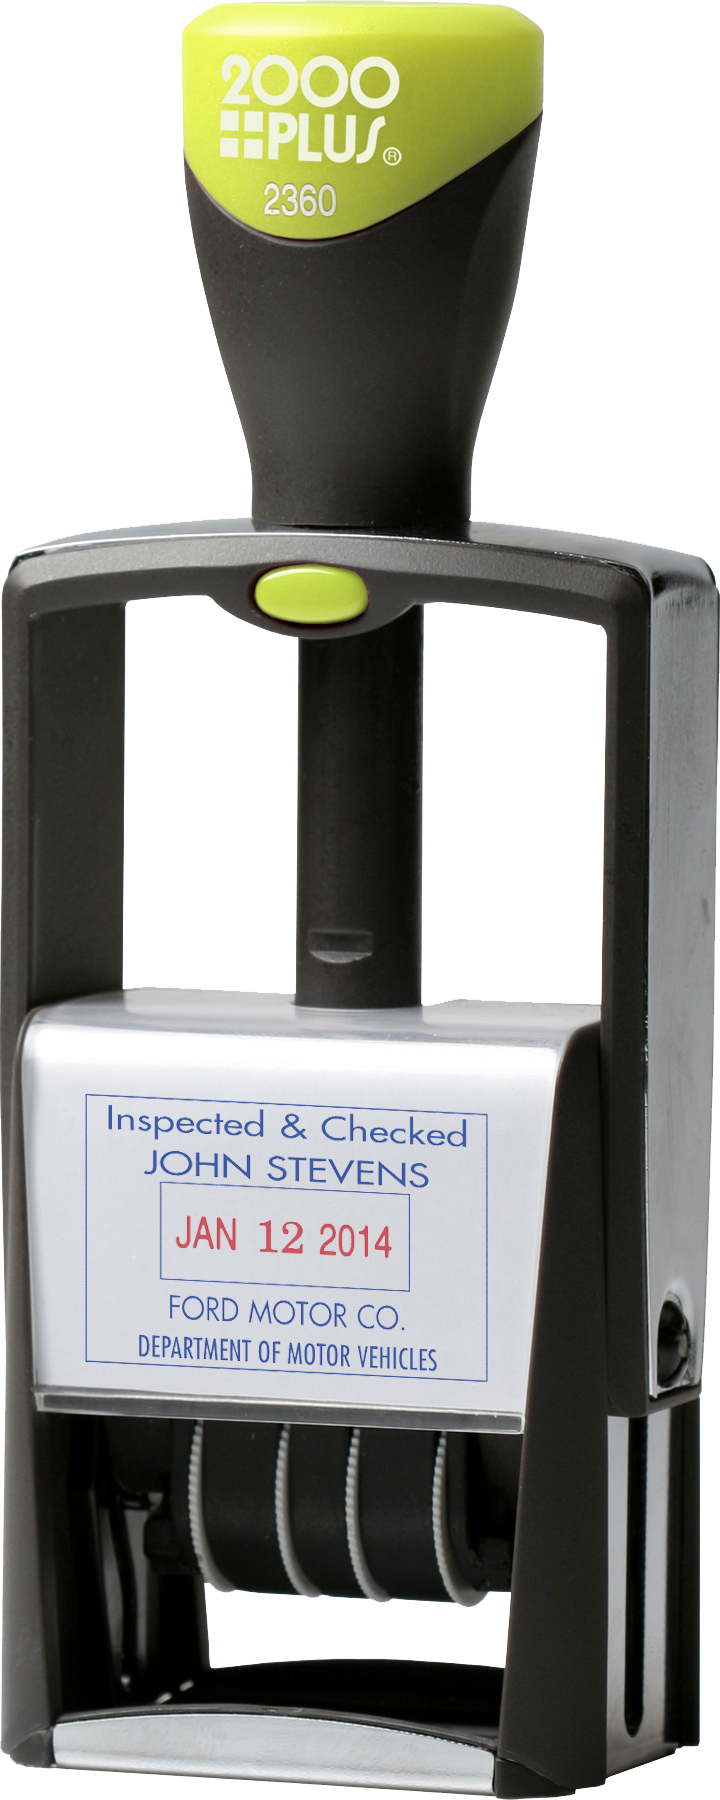 2000 Plus 2360 - Classic-Line Self-Inking Date Stamp